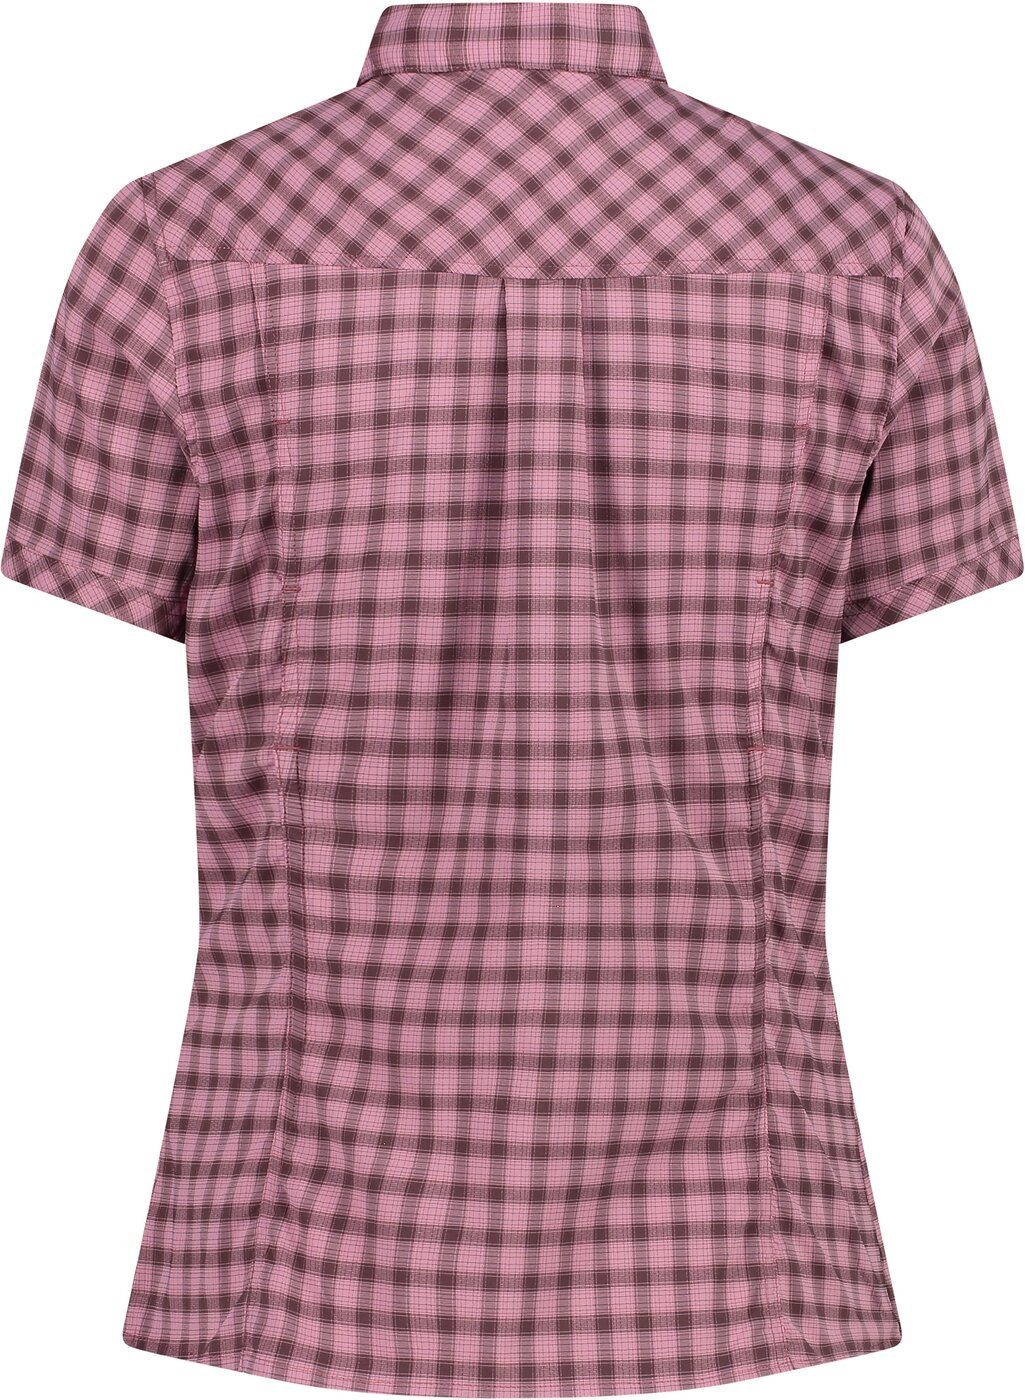 WOMAN CAMPAGNOLO SHIRT FARD-PLUM-ANTRACITE 74ZN Outdoorbluse